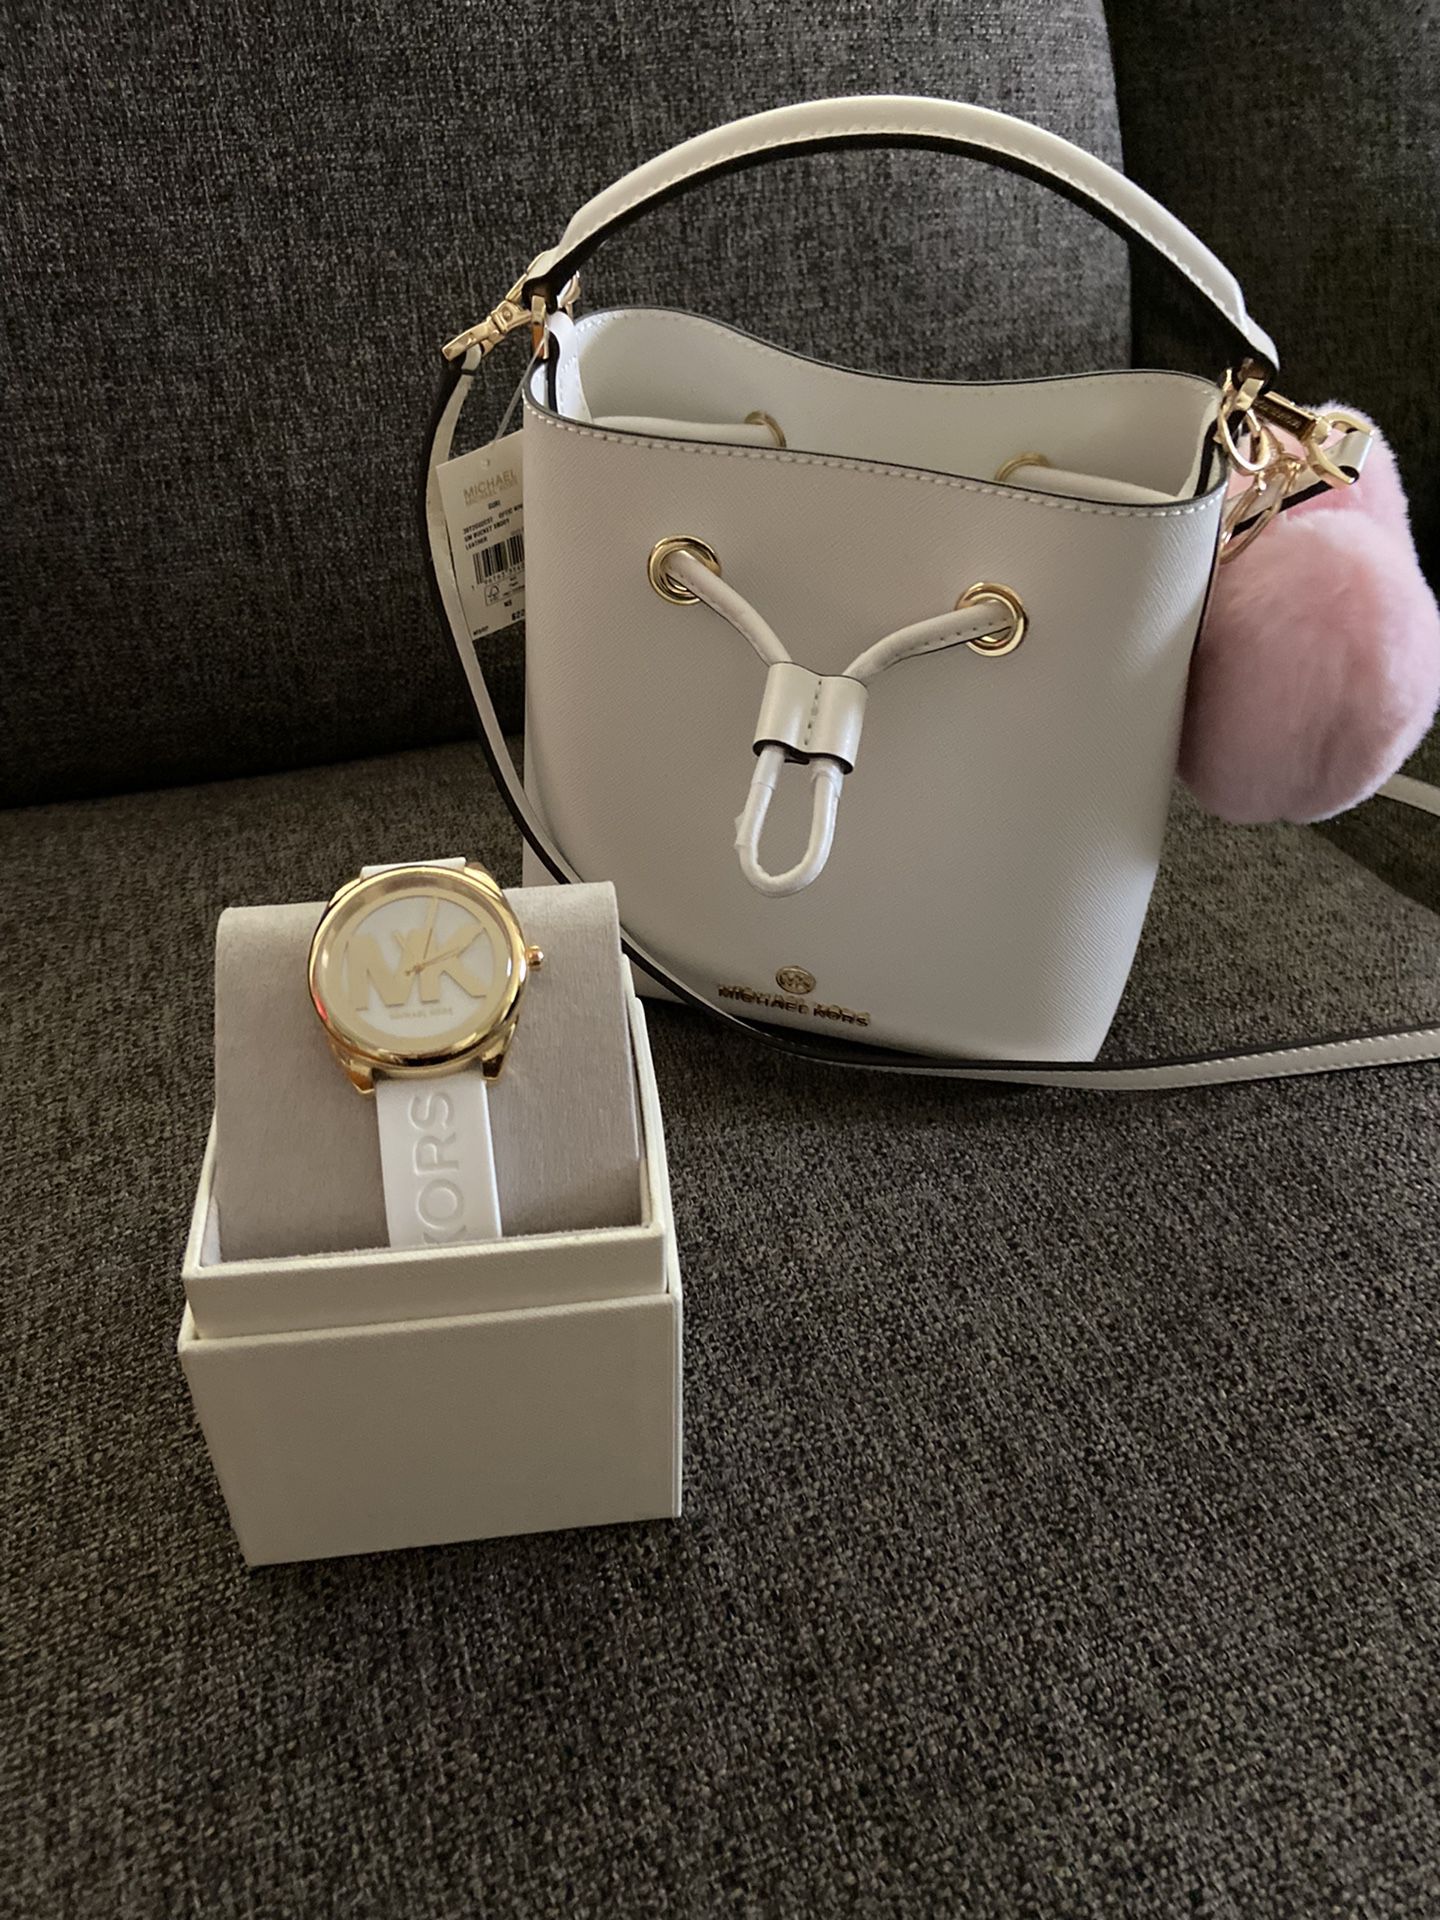 New Michael Kors Bucket Bag And Watch for Sale in Long Beach